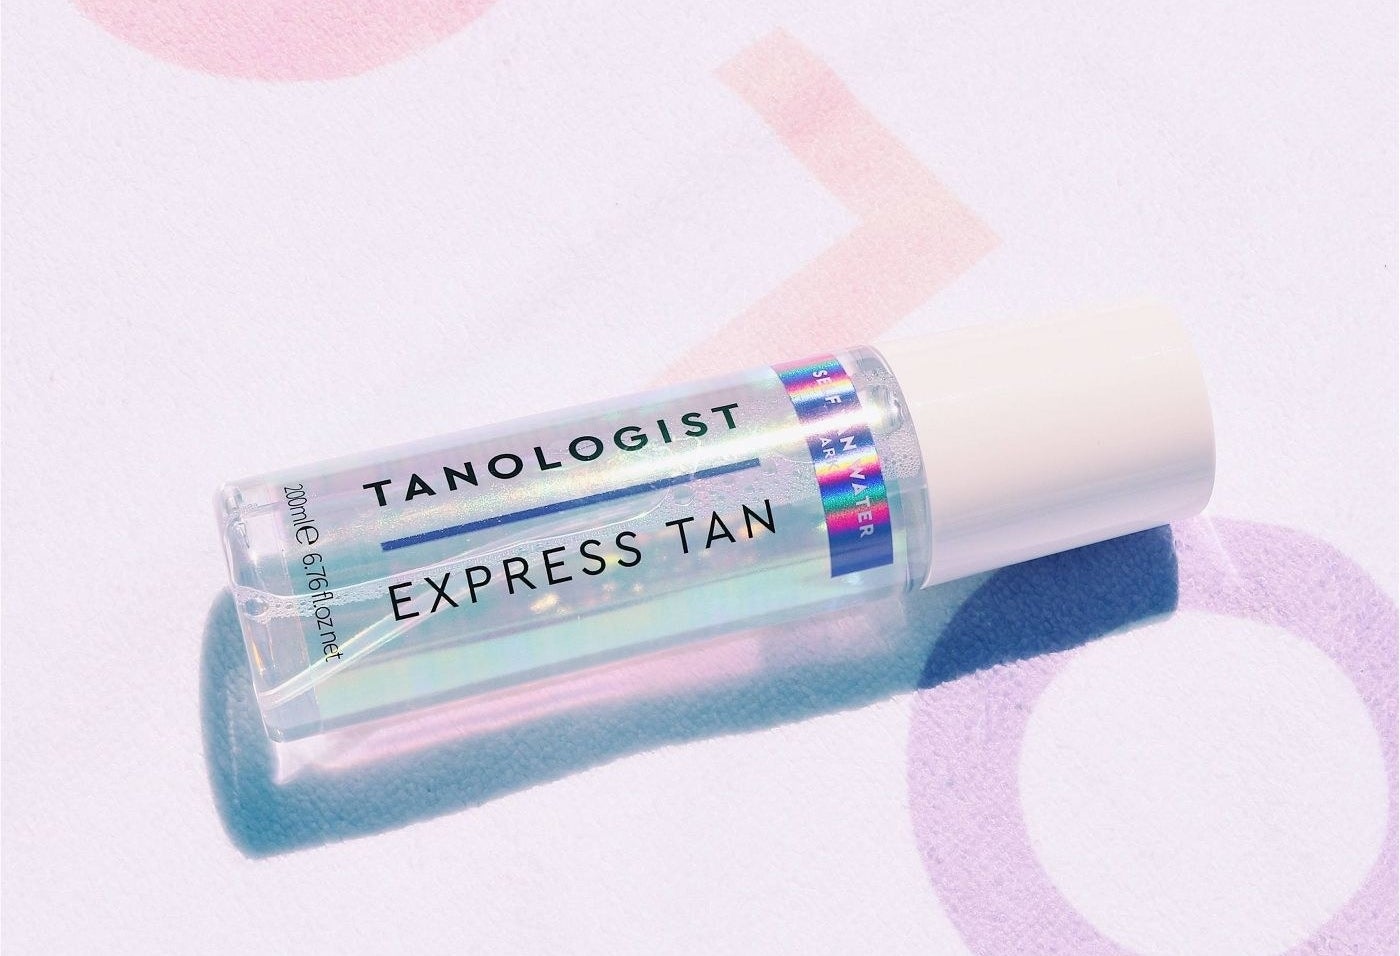 The bottle of clear express tan with a holographic label